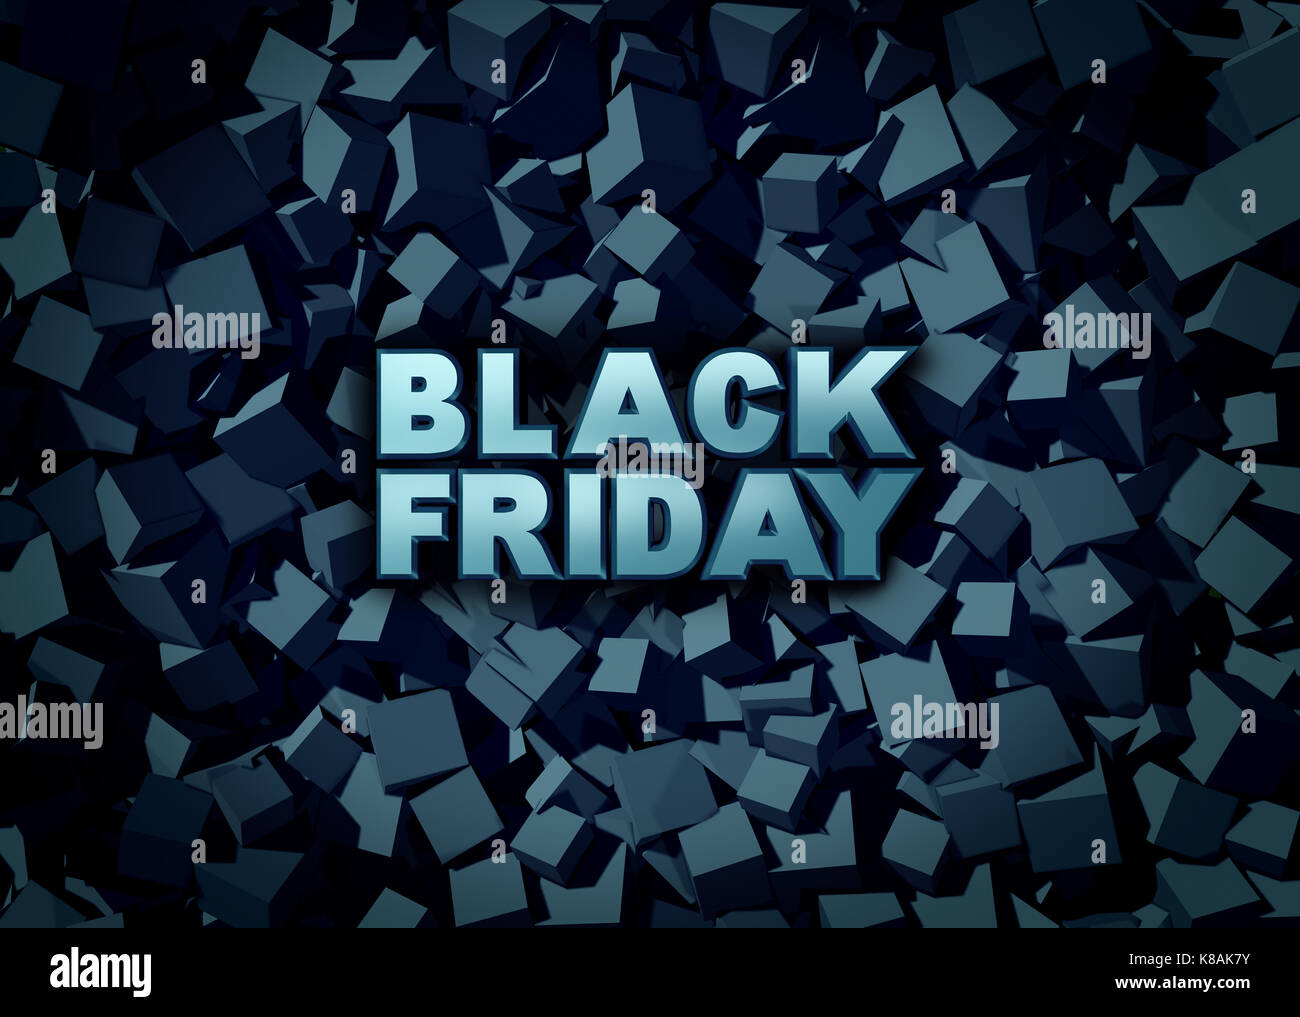 Black friday promotion sign as a sale banner as text on a dark background to celebrate holiday season shopping for low prices at retail stores. Stock Photo